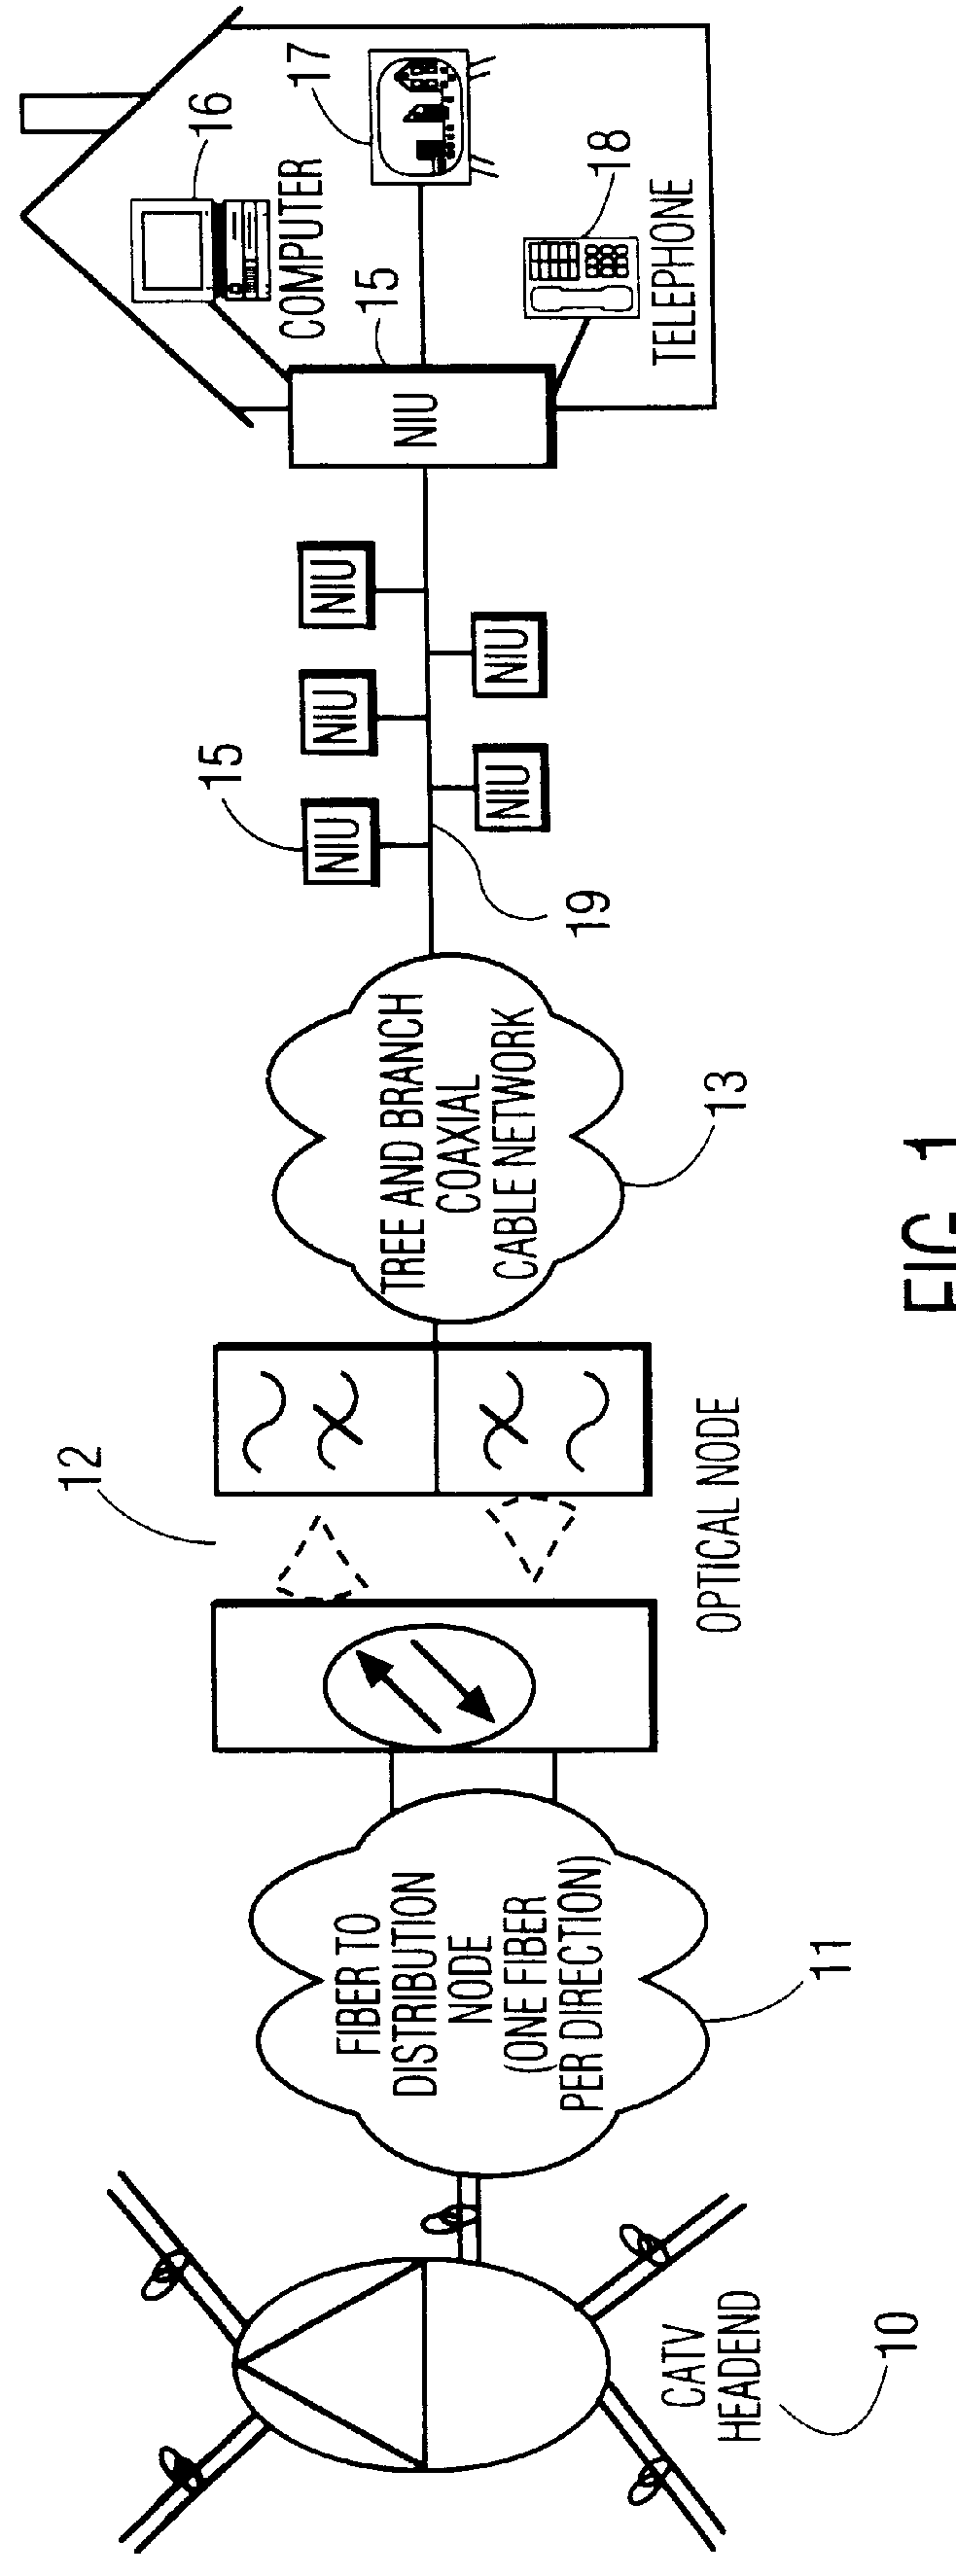 Method and apparatus for improved time division multiple access (TDMA) communication